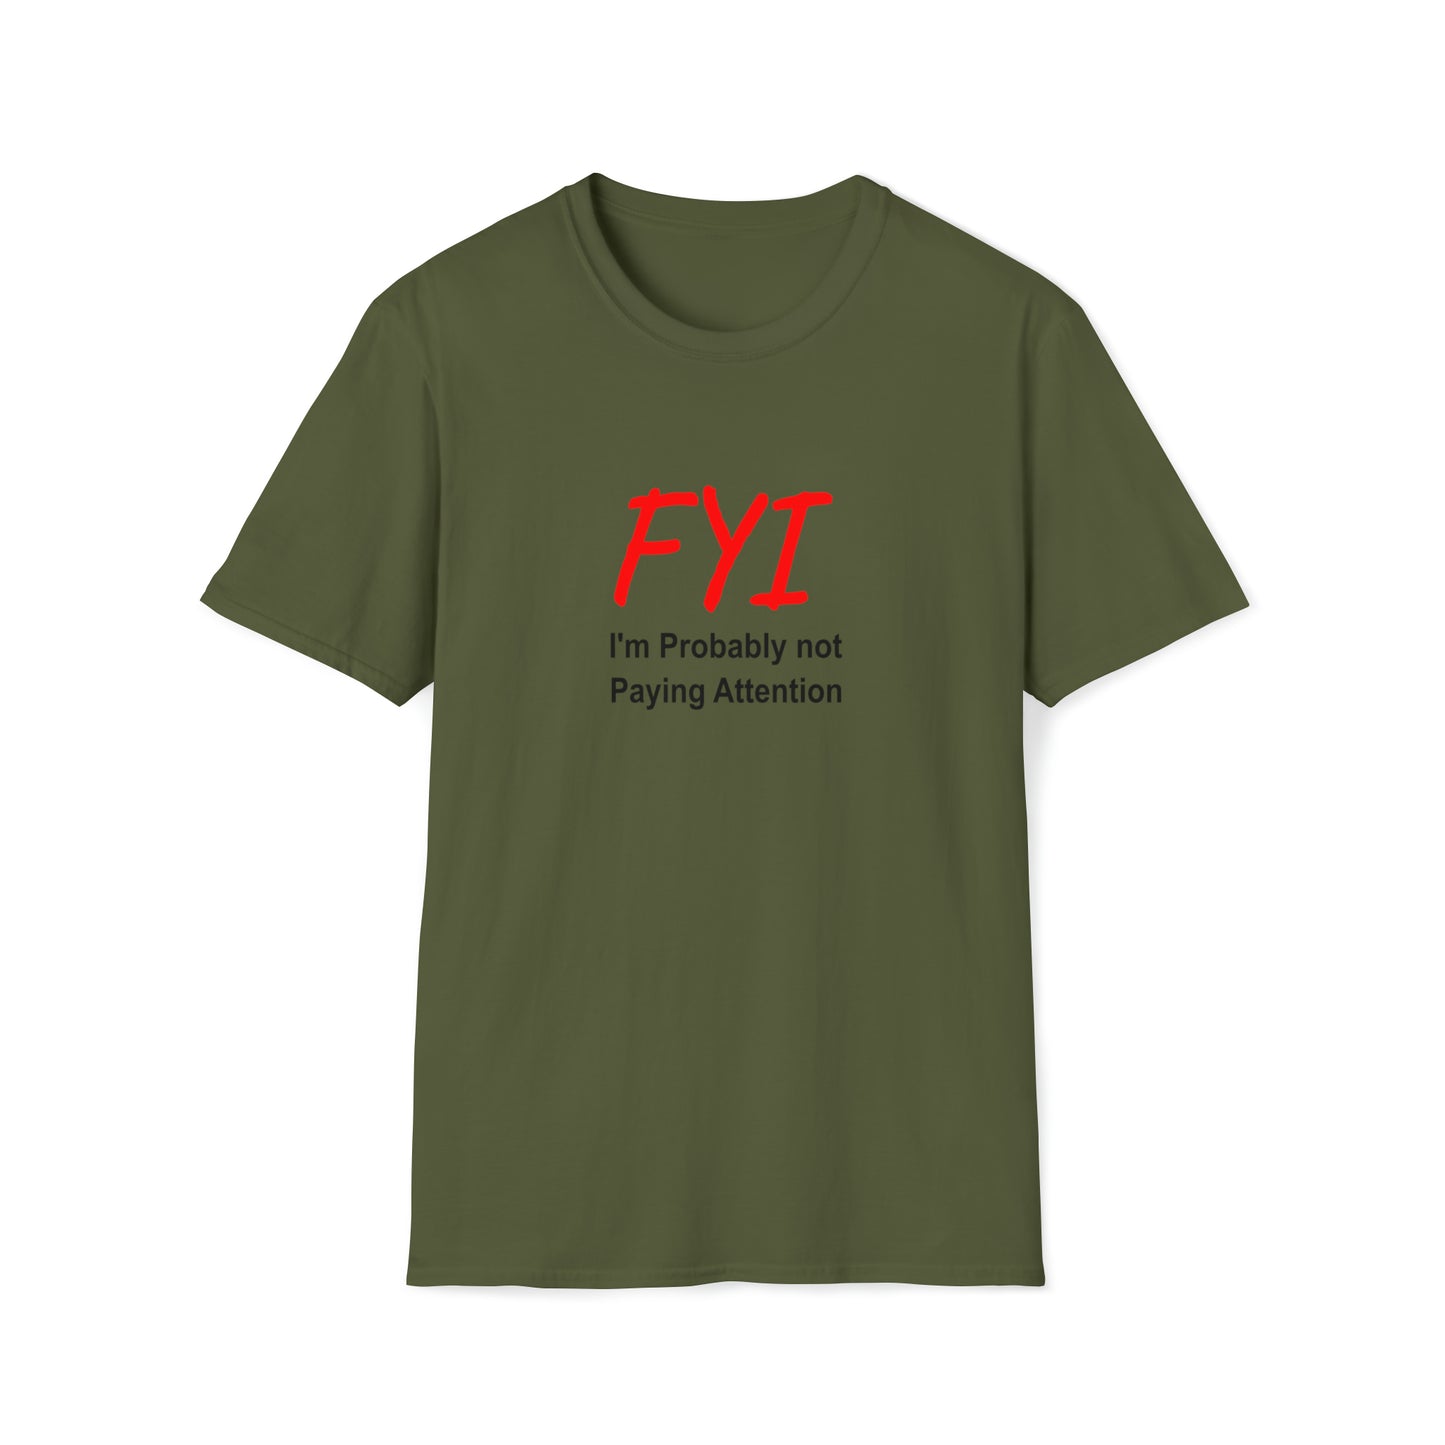 FYI not paying attention - T-Shirt